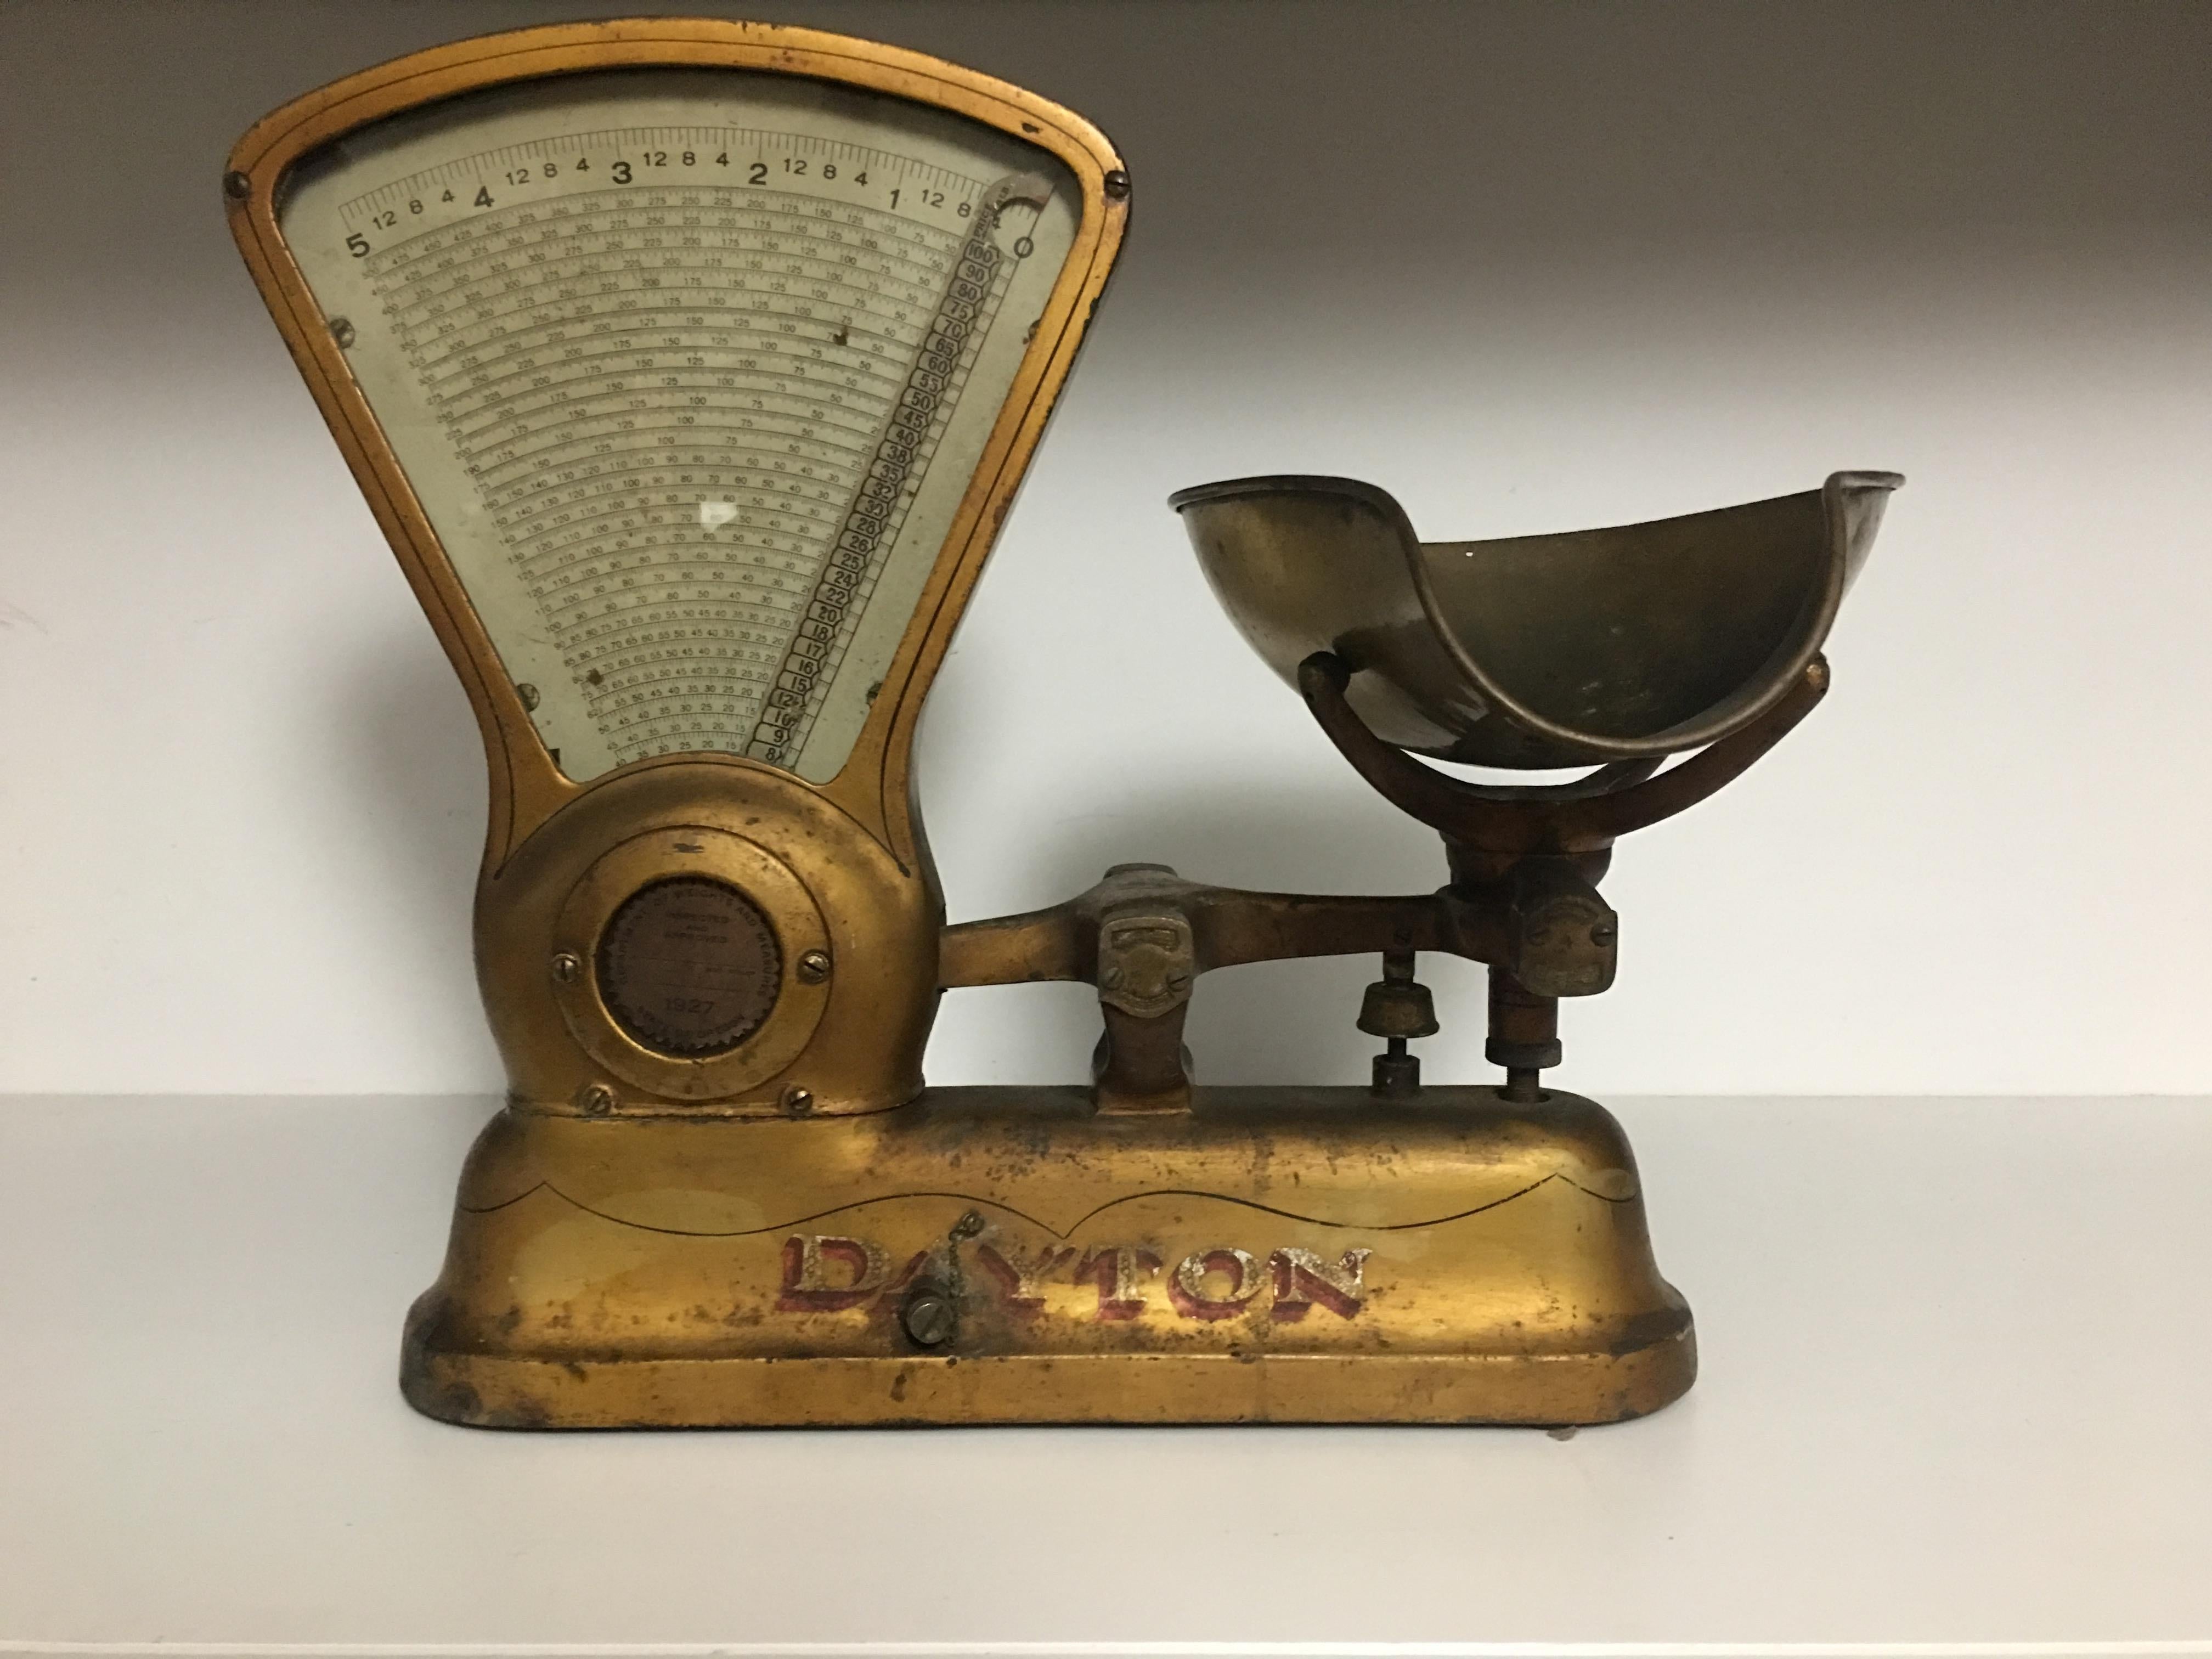 Dayton scale from the early 1900s, weighs in pounds, preserved and original, never restored, in working order.